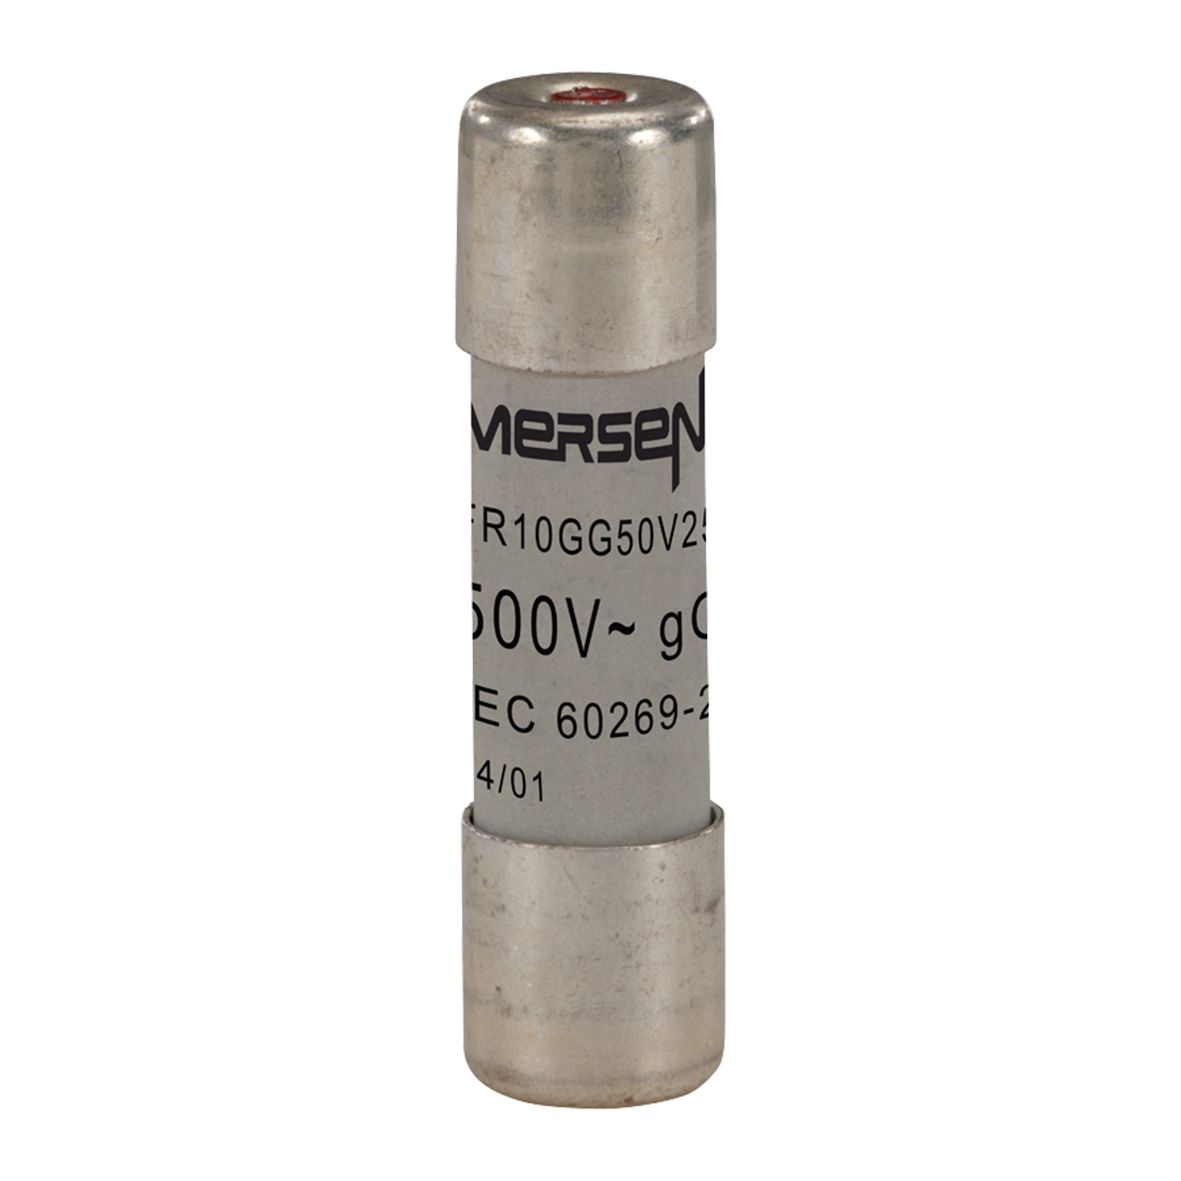 W212585 - Cylindrical fuse-link gG 500VAC 10.3x38, 25A with indicator